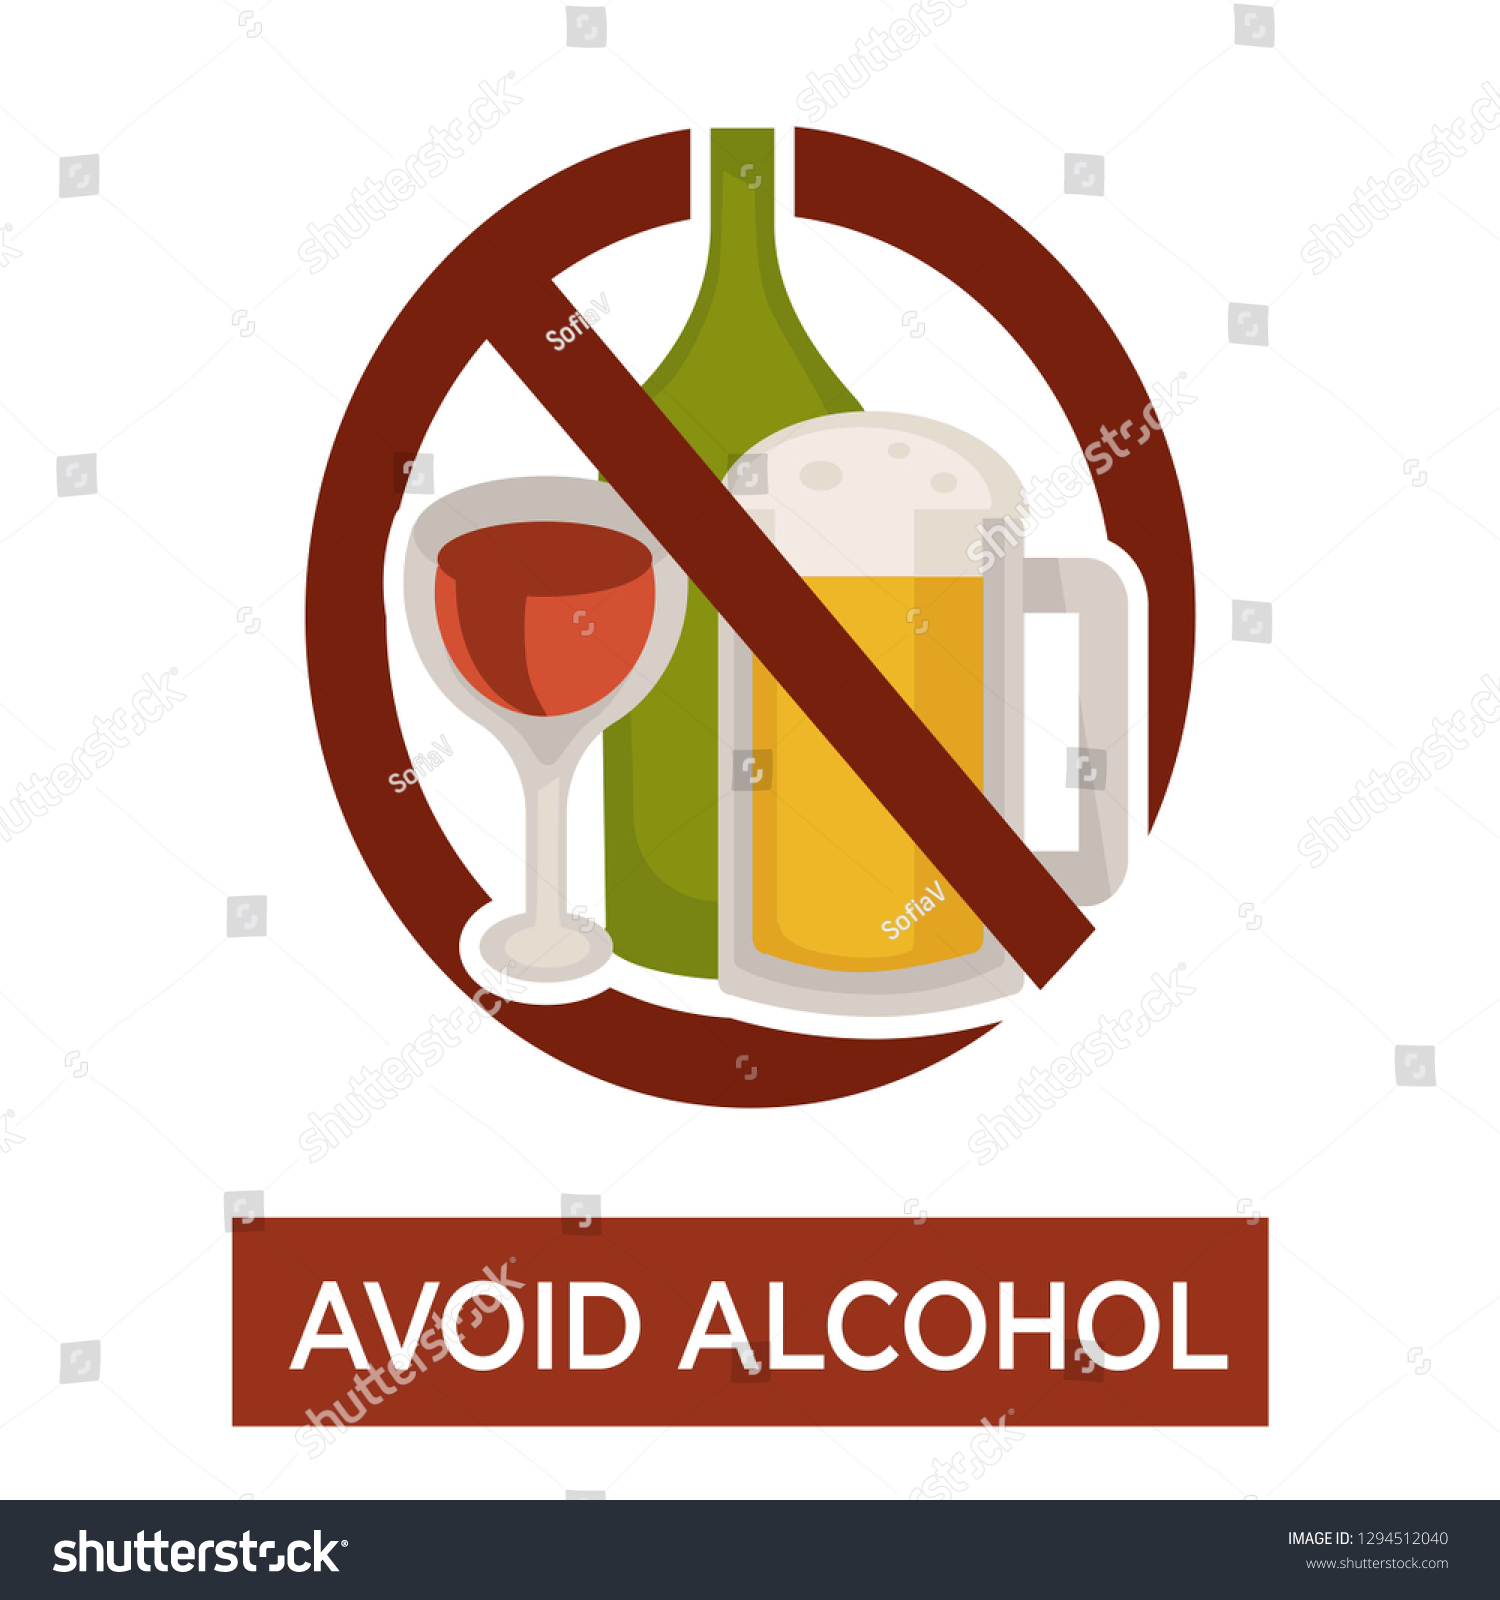 Warning Sign Avoid Alcohol Crossed Beer Stock Vector (Royalty Free ...